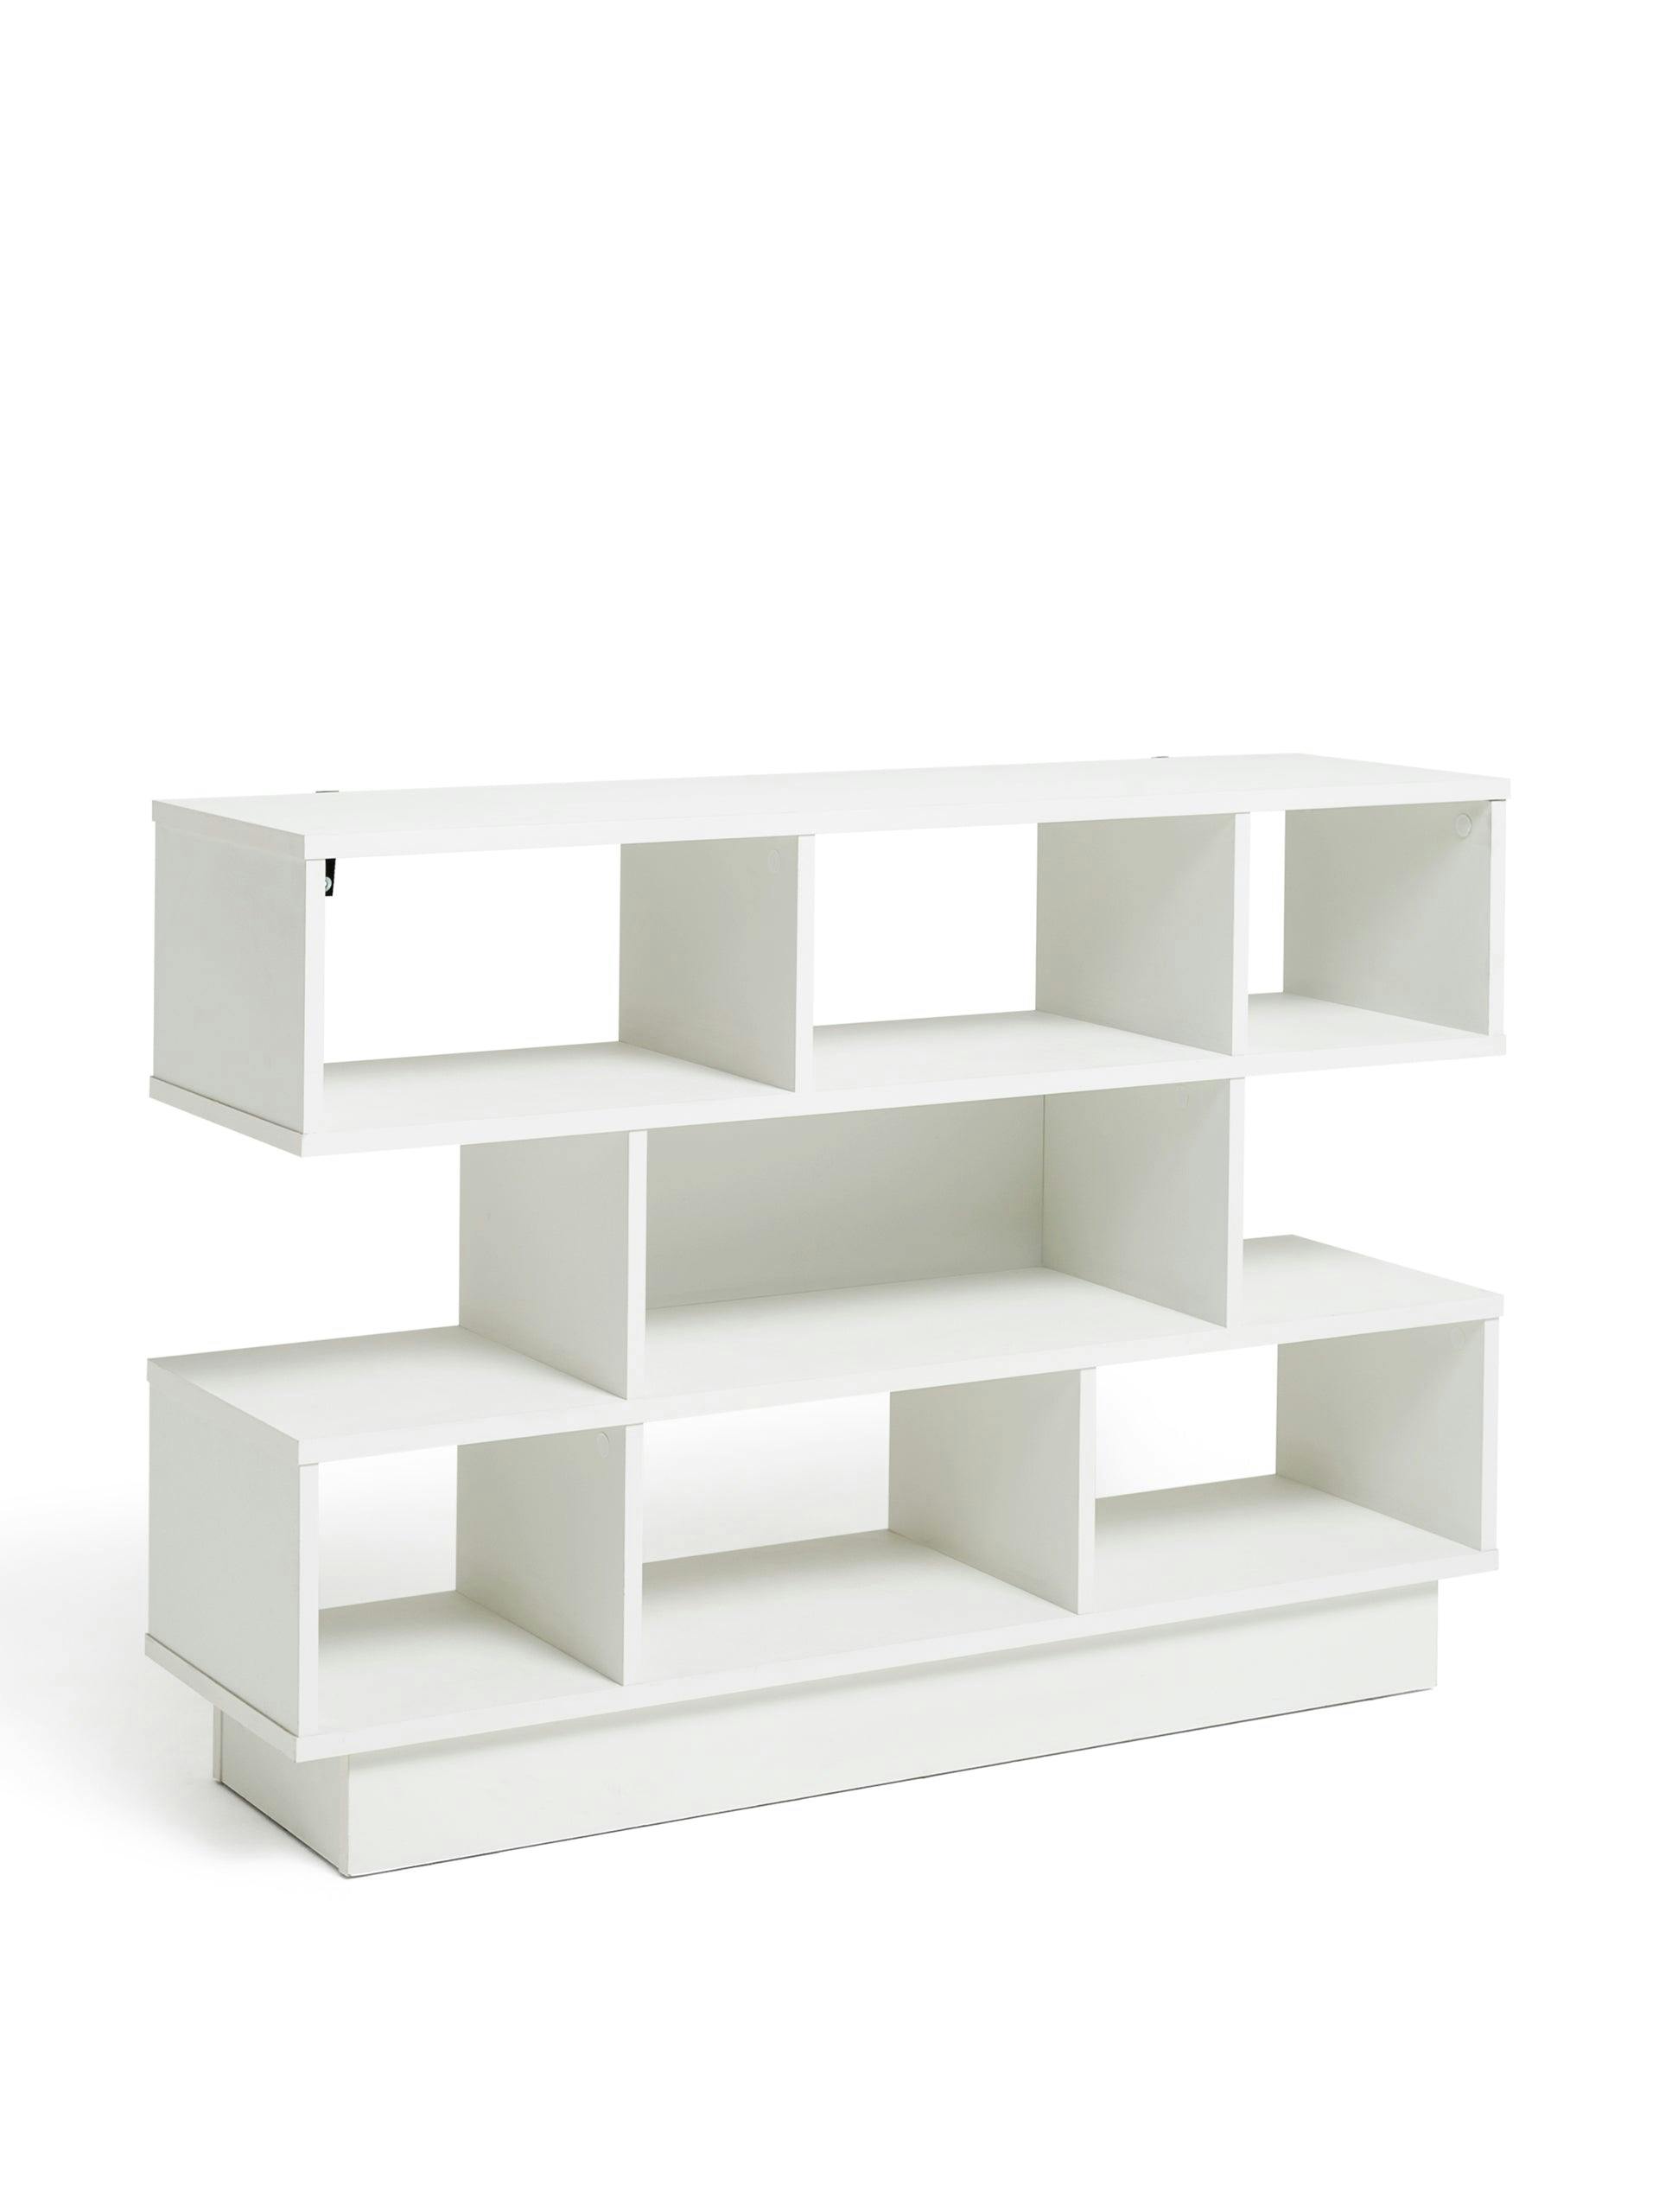 Cubed short wide bookcase